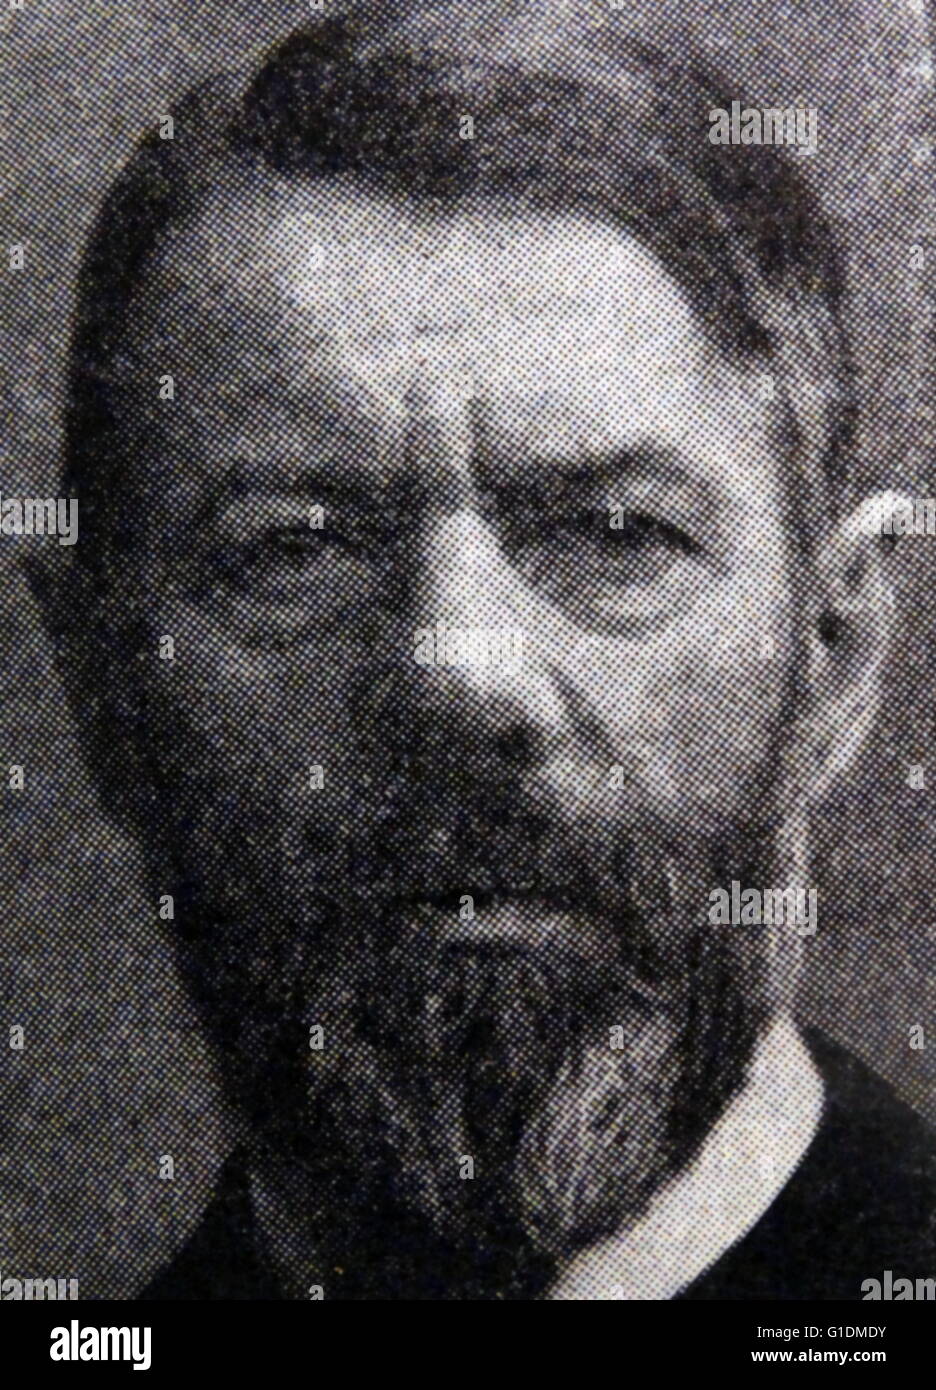 Photographic portrait of Max Weber (1864-1920) a German sociologist, philosopher, jurist, and political economist. Dated 20th Century Stock Photo